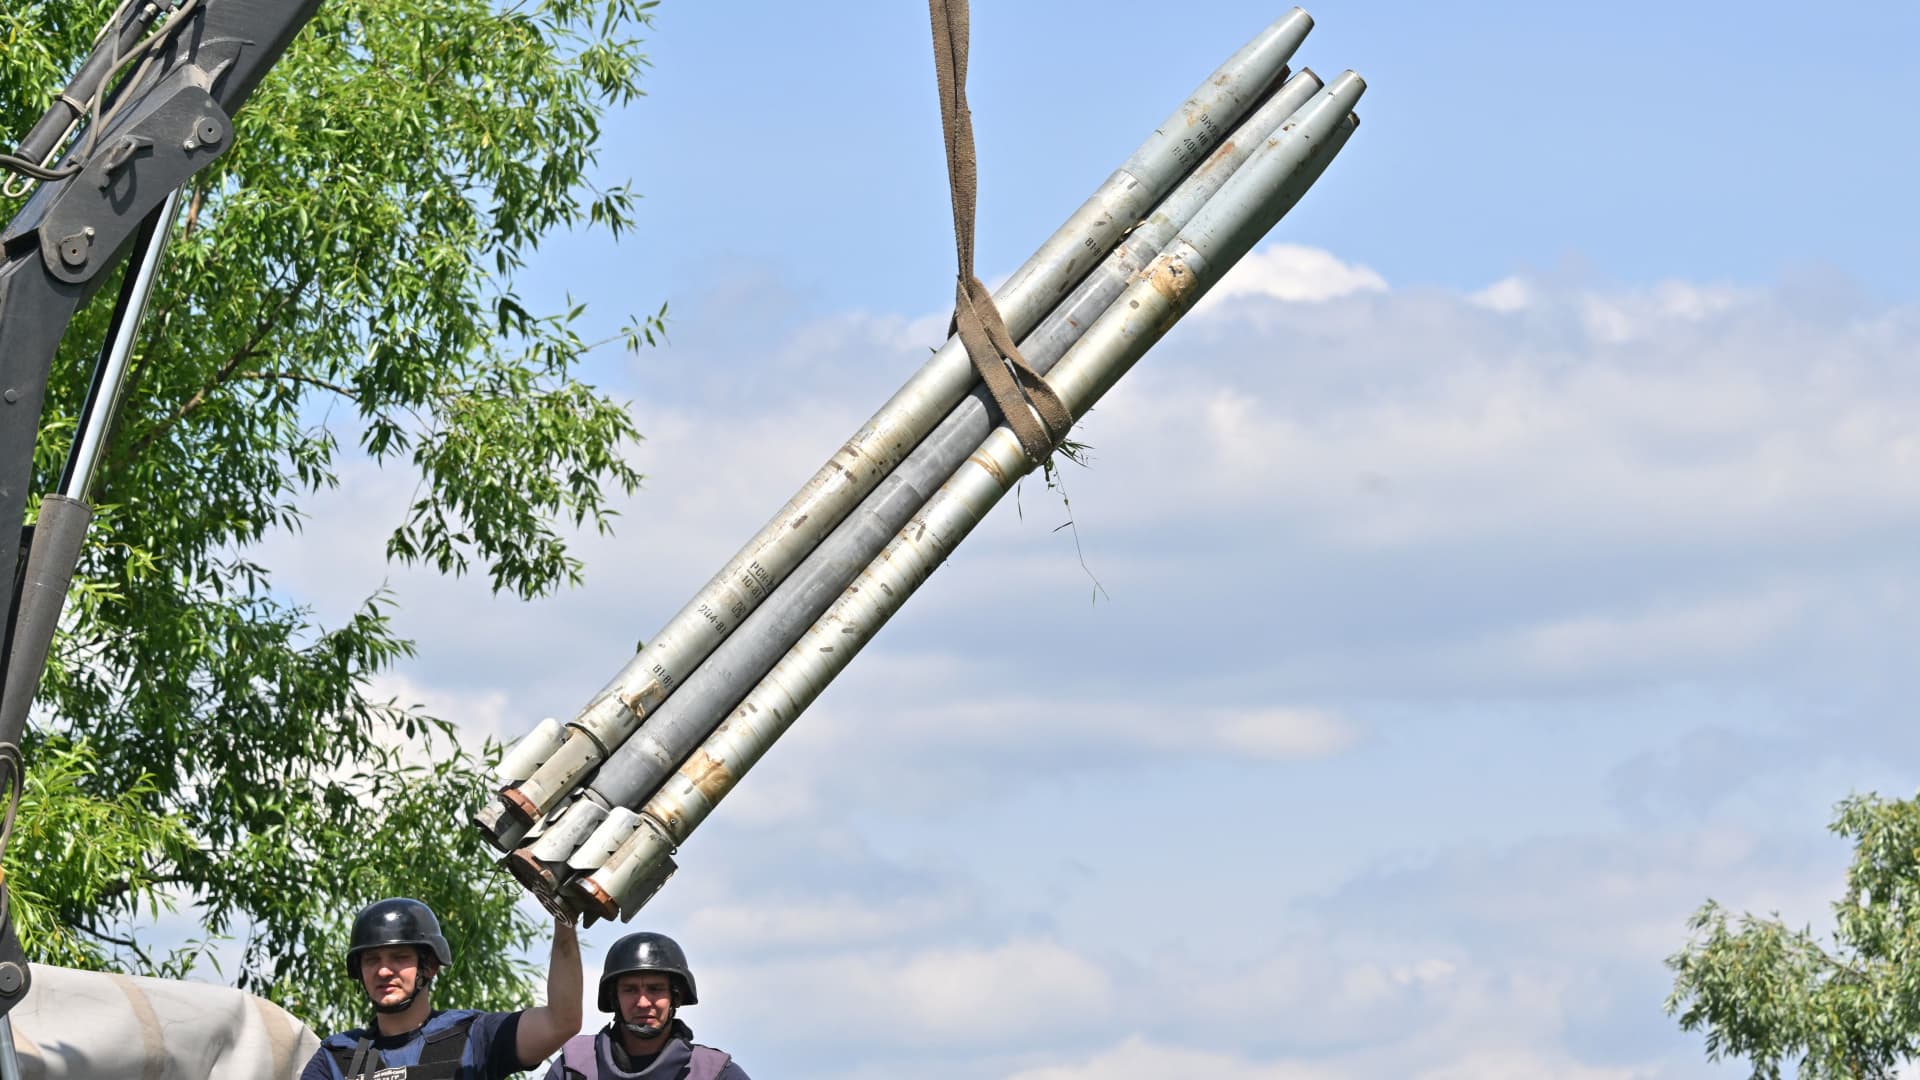 Ukrainian bomb disposal workers load unexploded ordnance in containers before transportation aboard a special vehicle during mine clearance work in the village of Yahidne, in the liberated territories of the Chernihiv region on June 7, 2022 amid the Russian invasion of Ukraine.